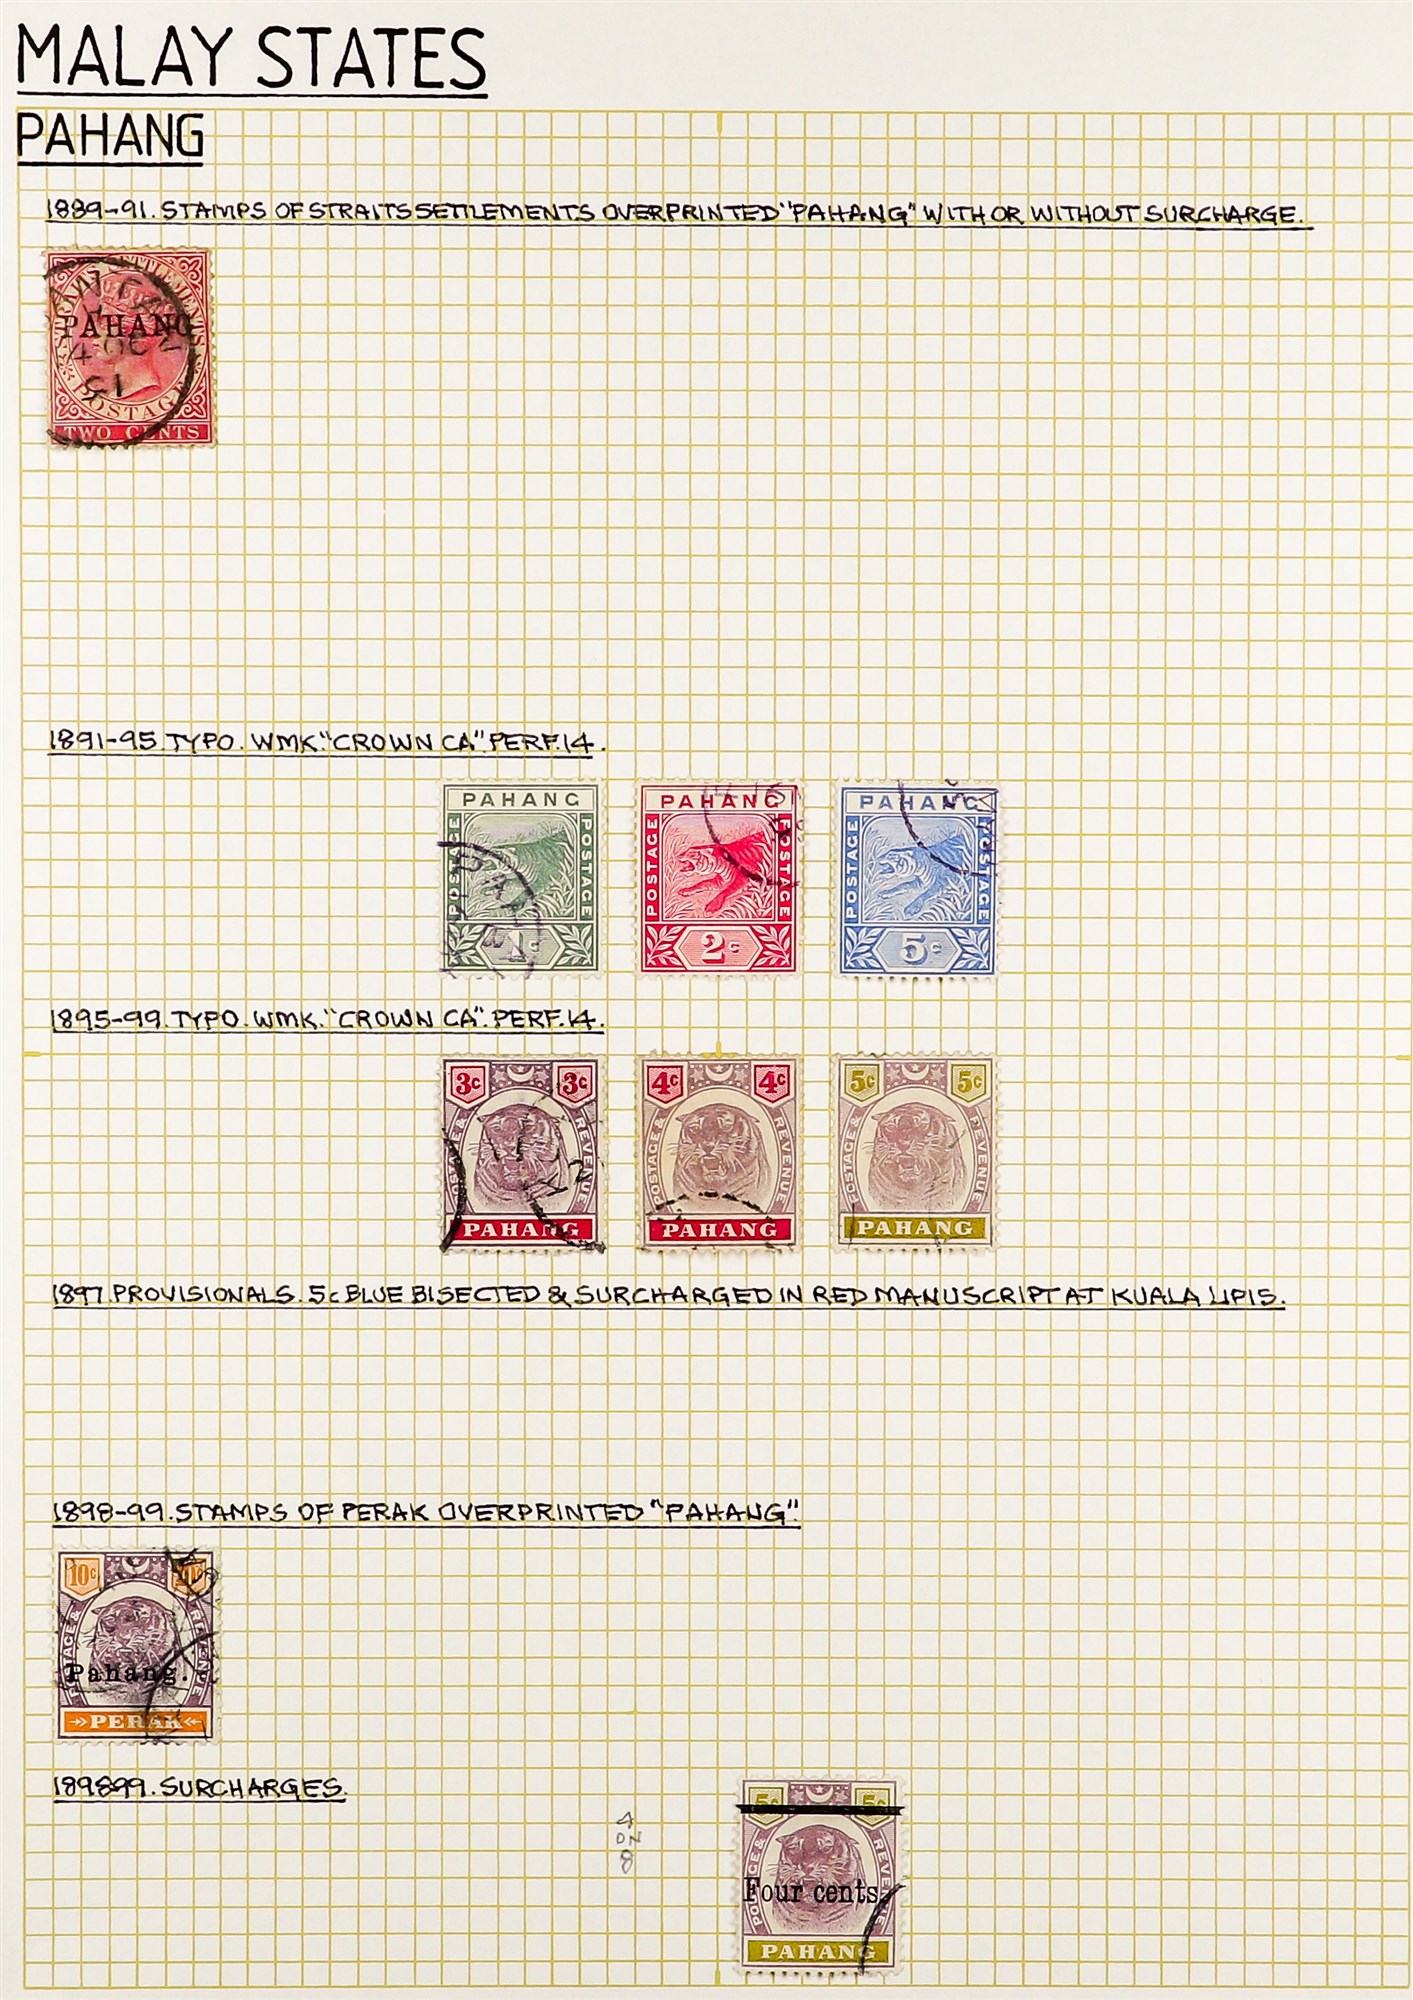 MALAYA STATES PAHANG 1889 - 1965 COLLECTION of 68 very fine used stamps on several album pages, note